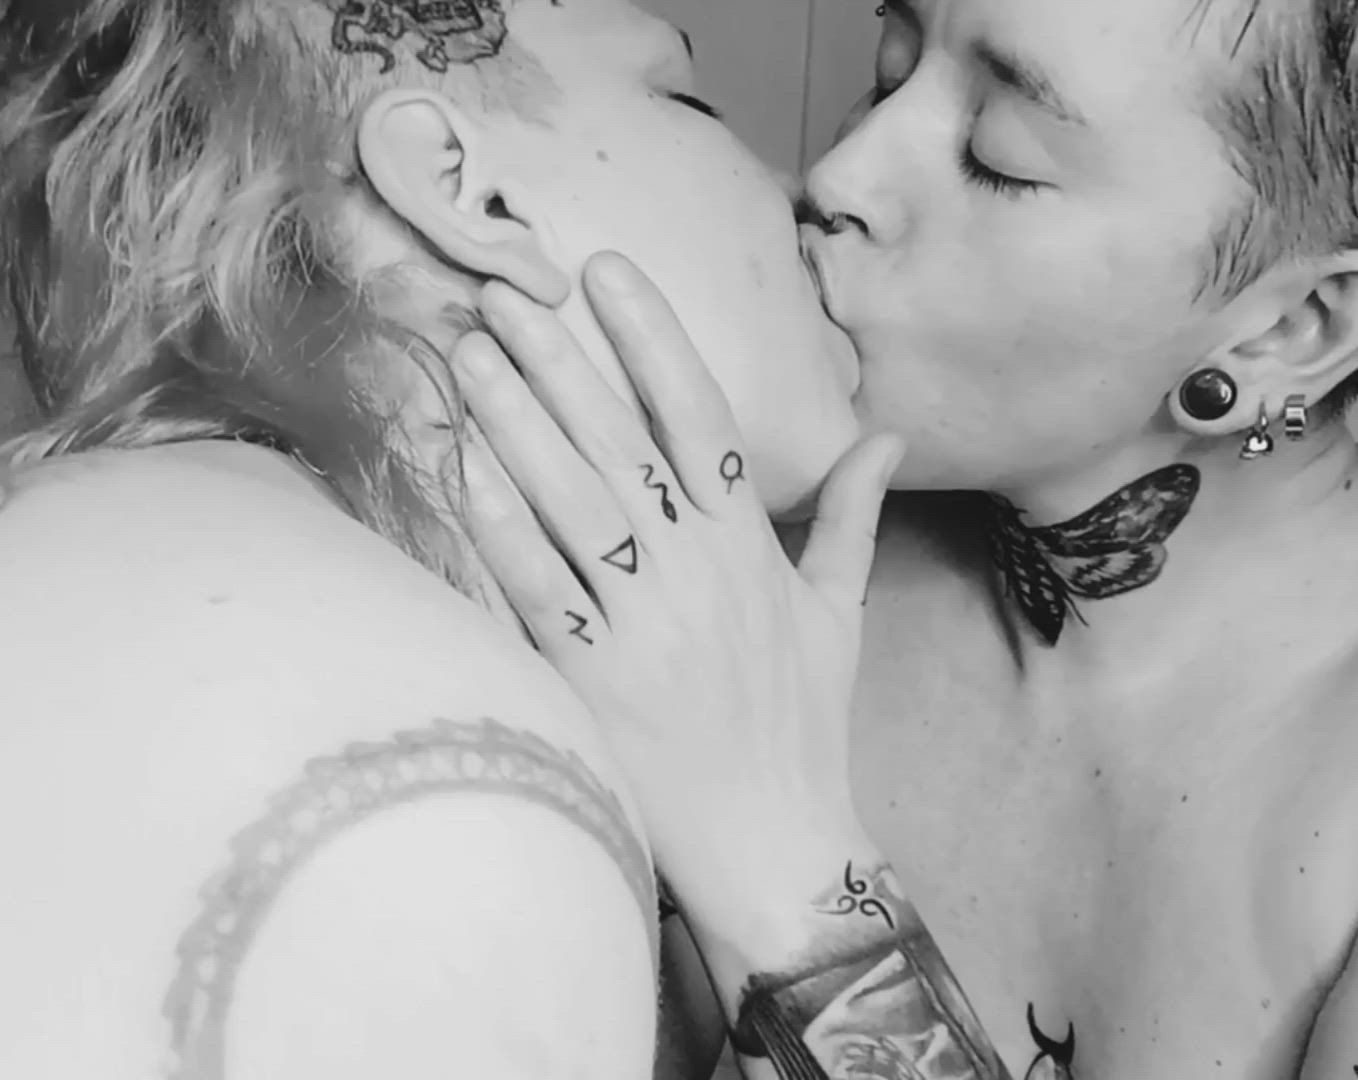 Lesbian porn video with onlyfans model Bunny bitchcraft <strong>@kisakumiss</strong>